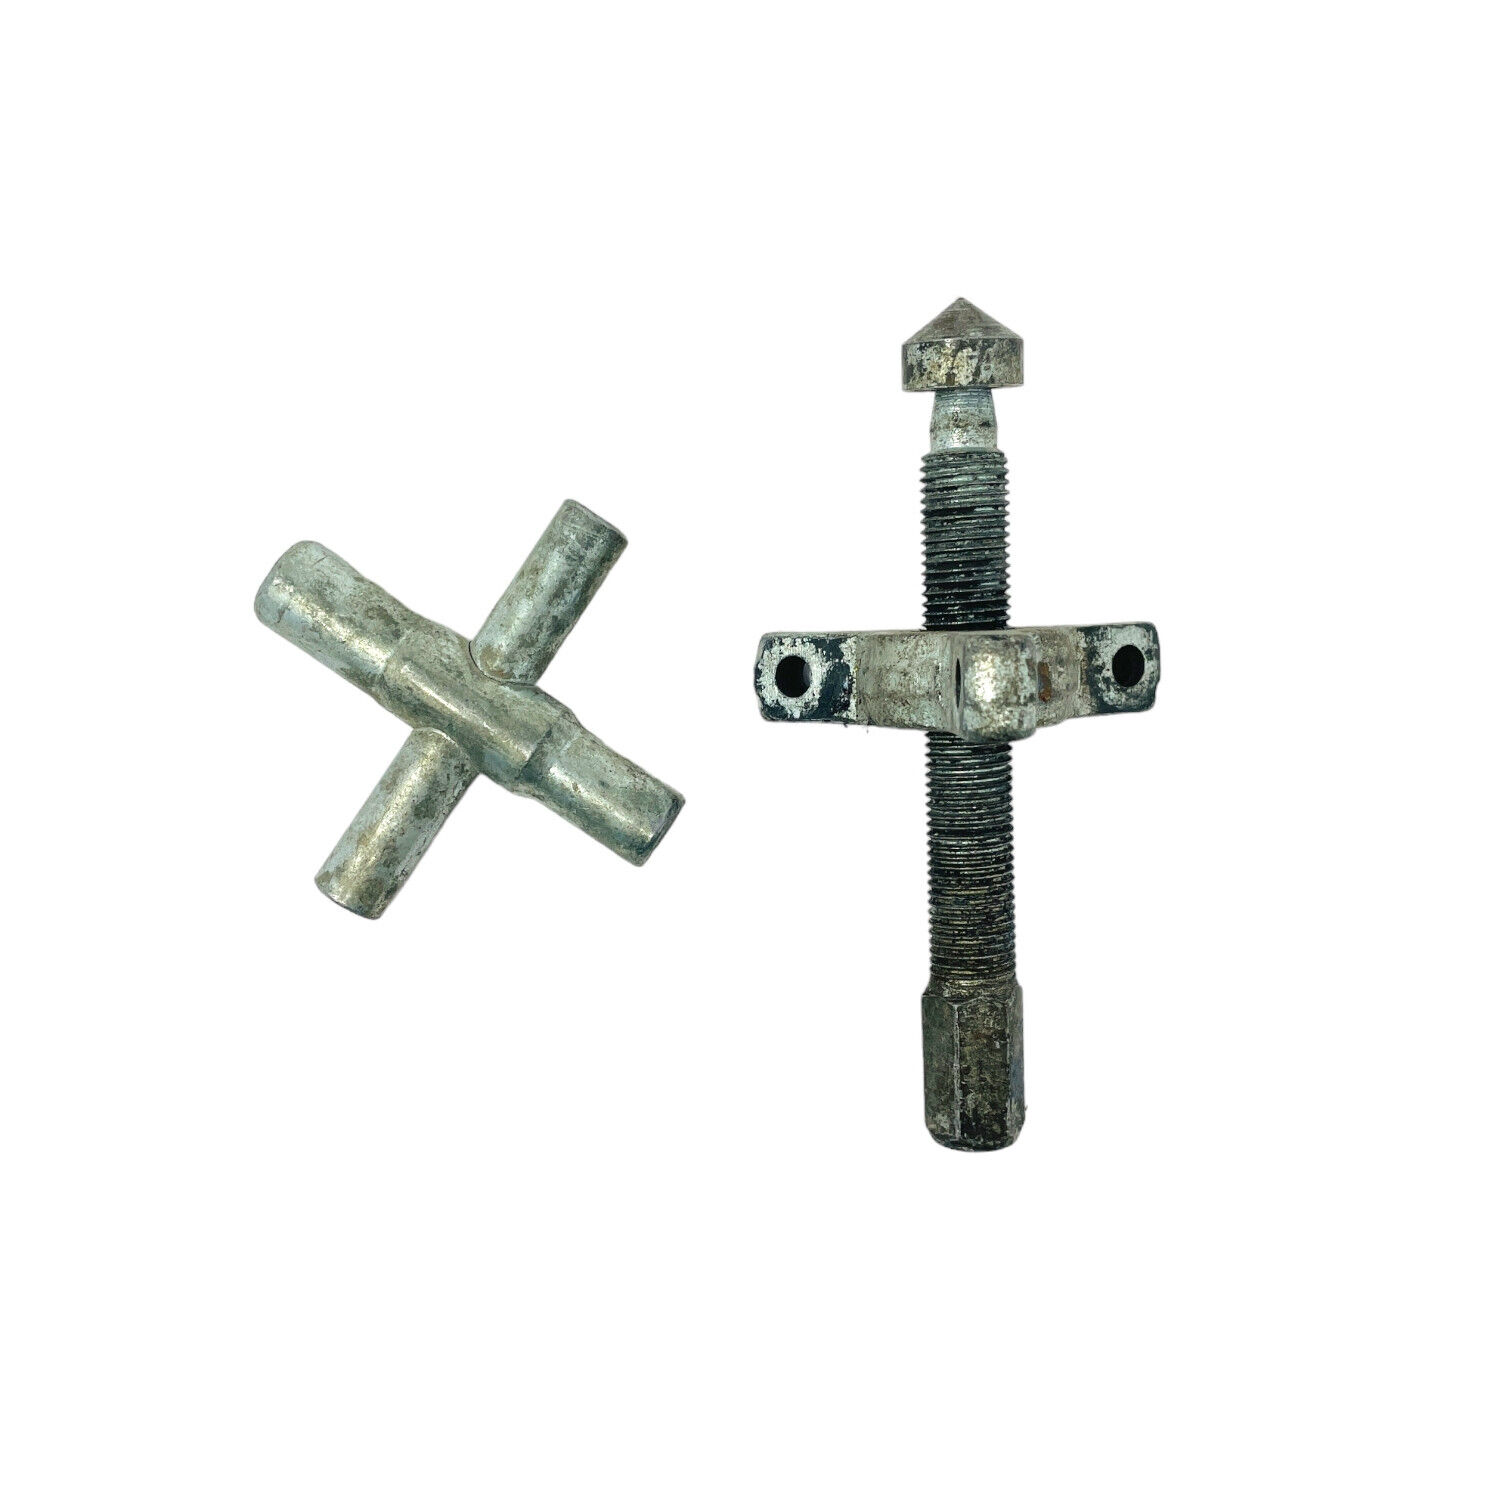 2 Pcs Vintage Socket Wrench and Drop Forged Hex Draw Bolt